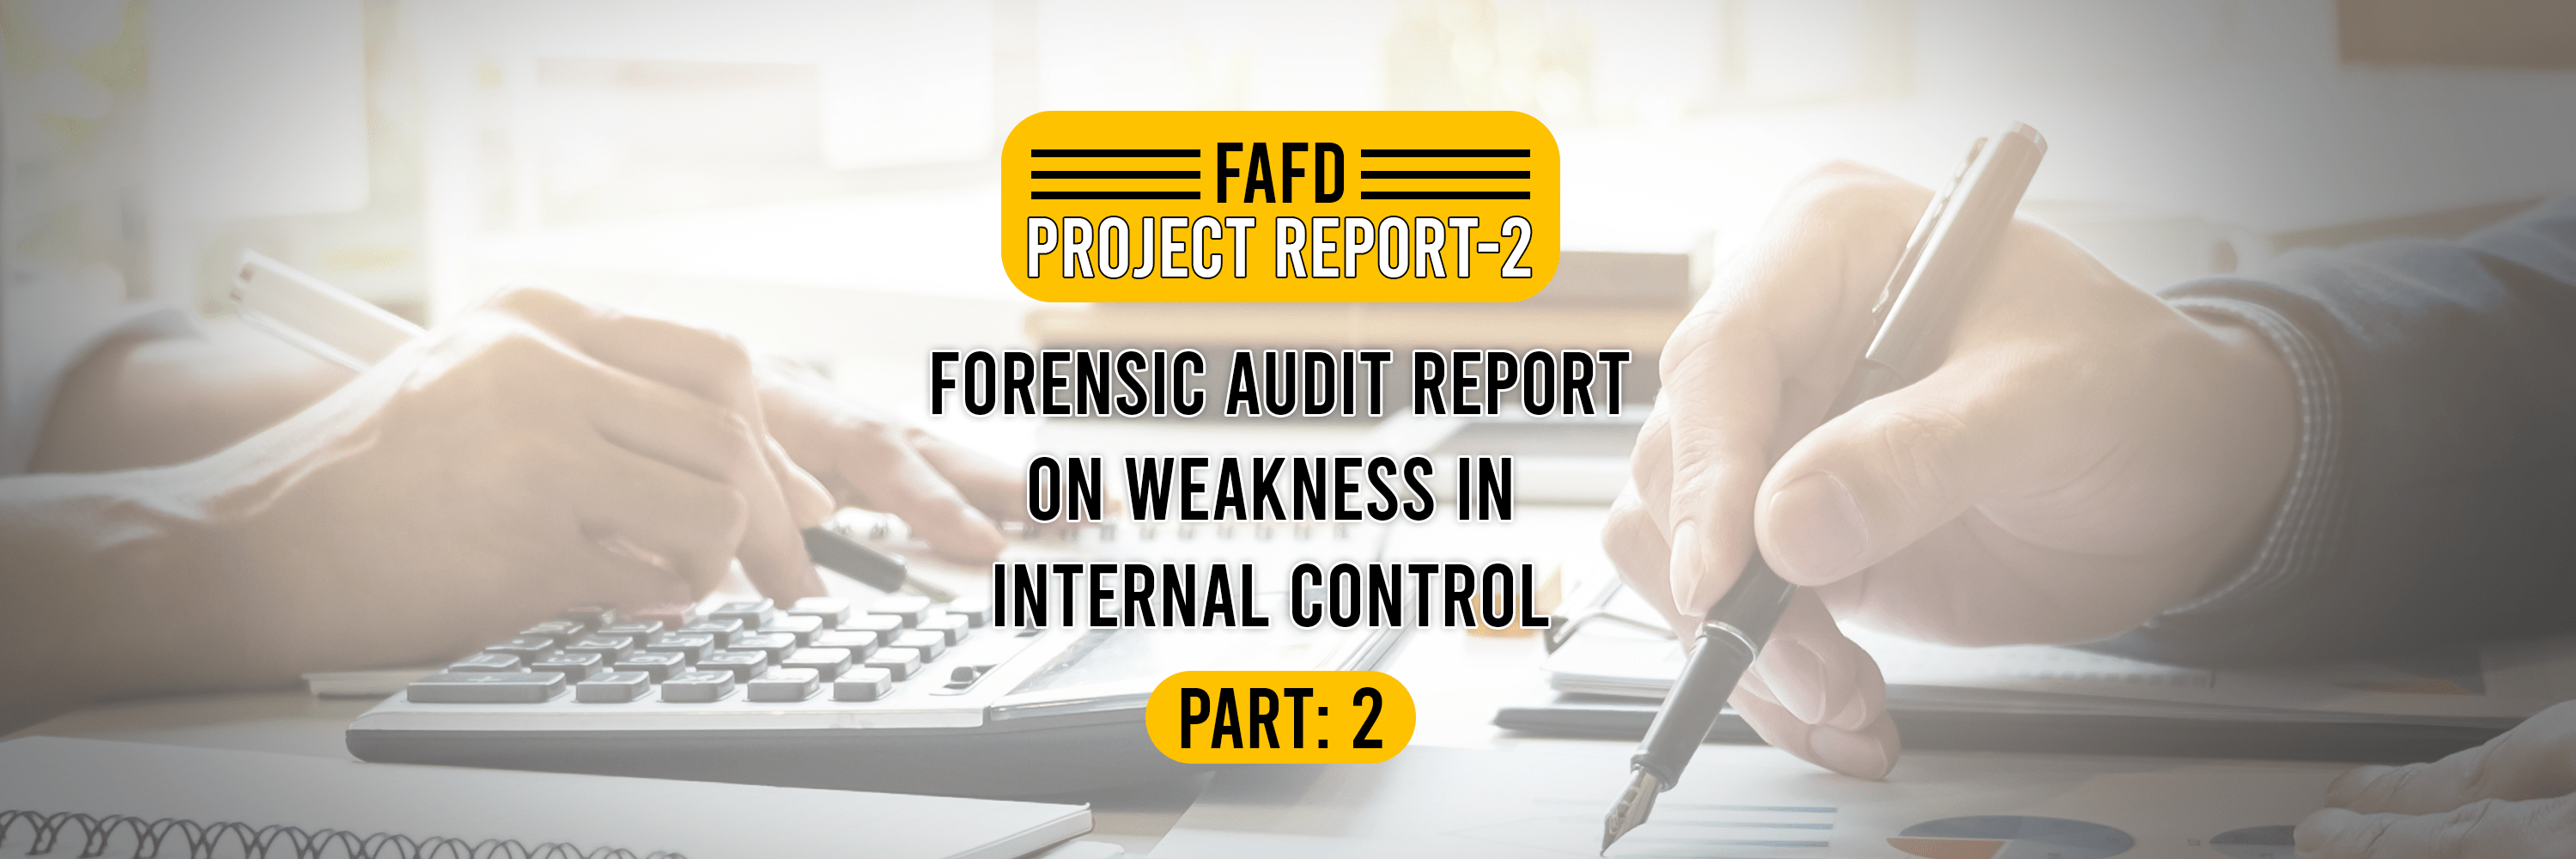 Forensic Audit Report on Weakness in Internal Control FAFD Project 2